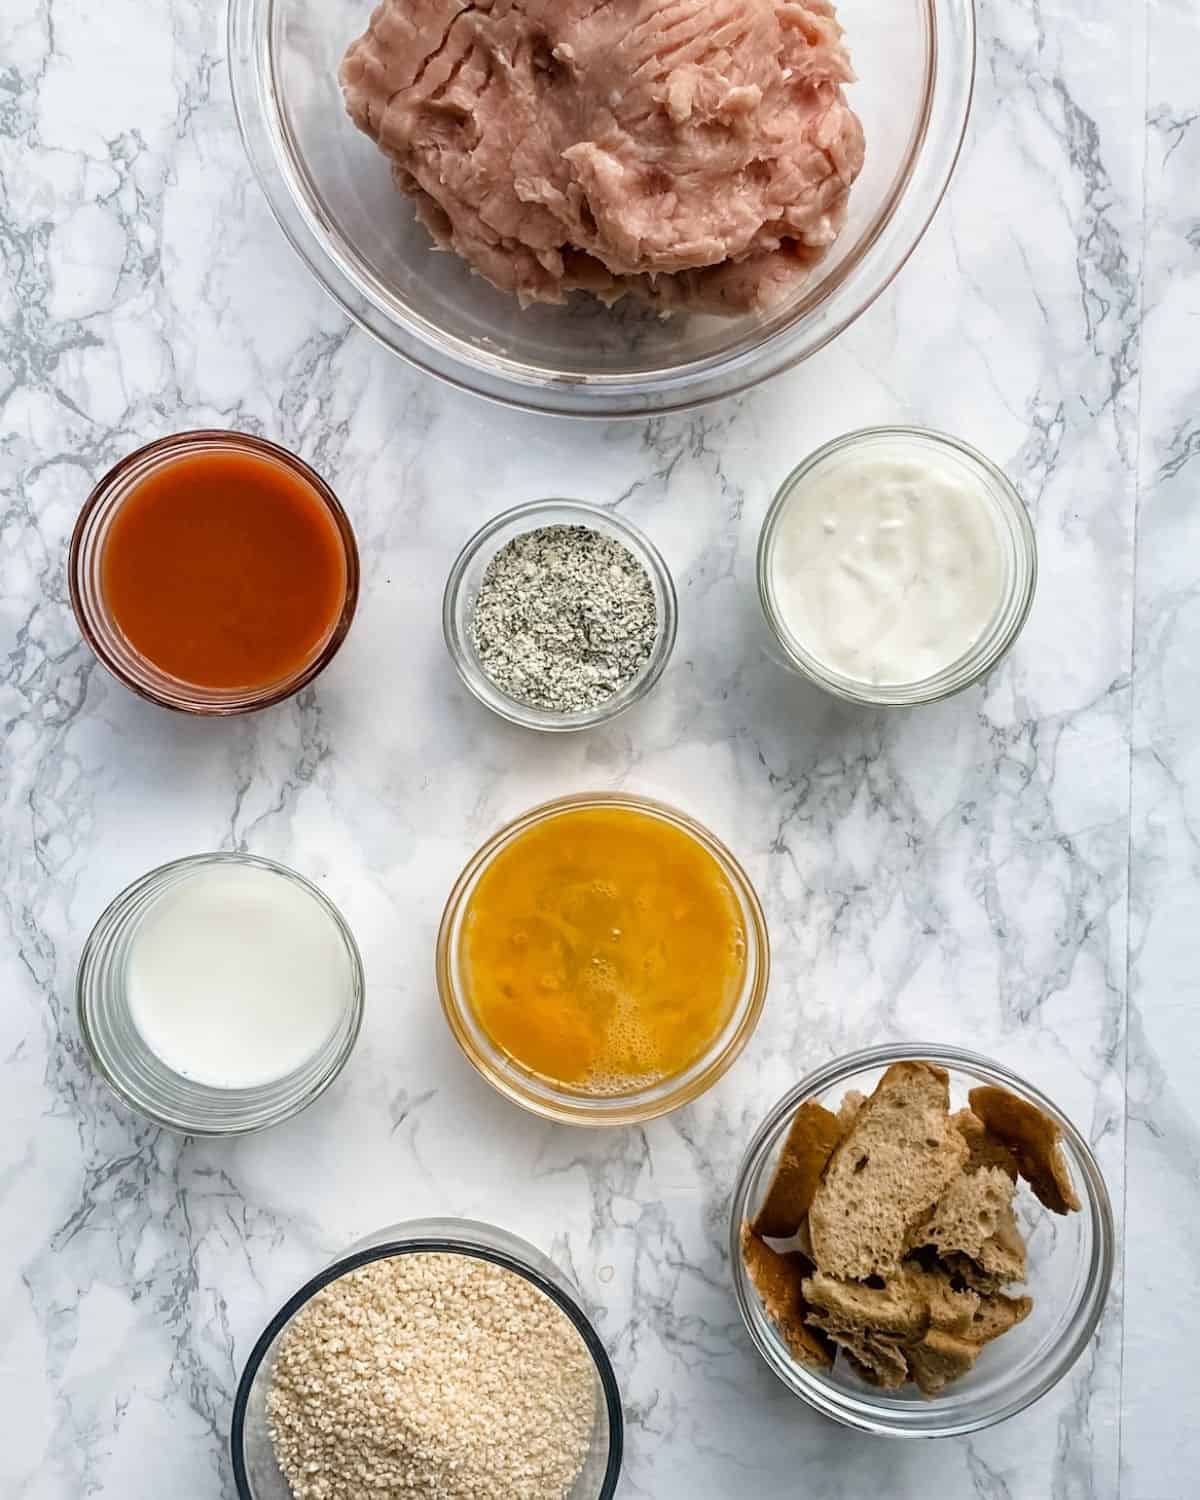 Ingredients to make buffalo chicken meatloaf